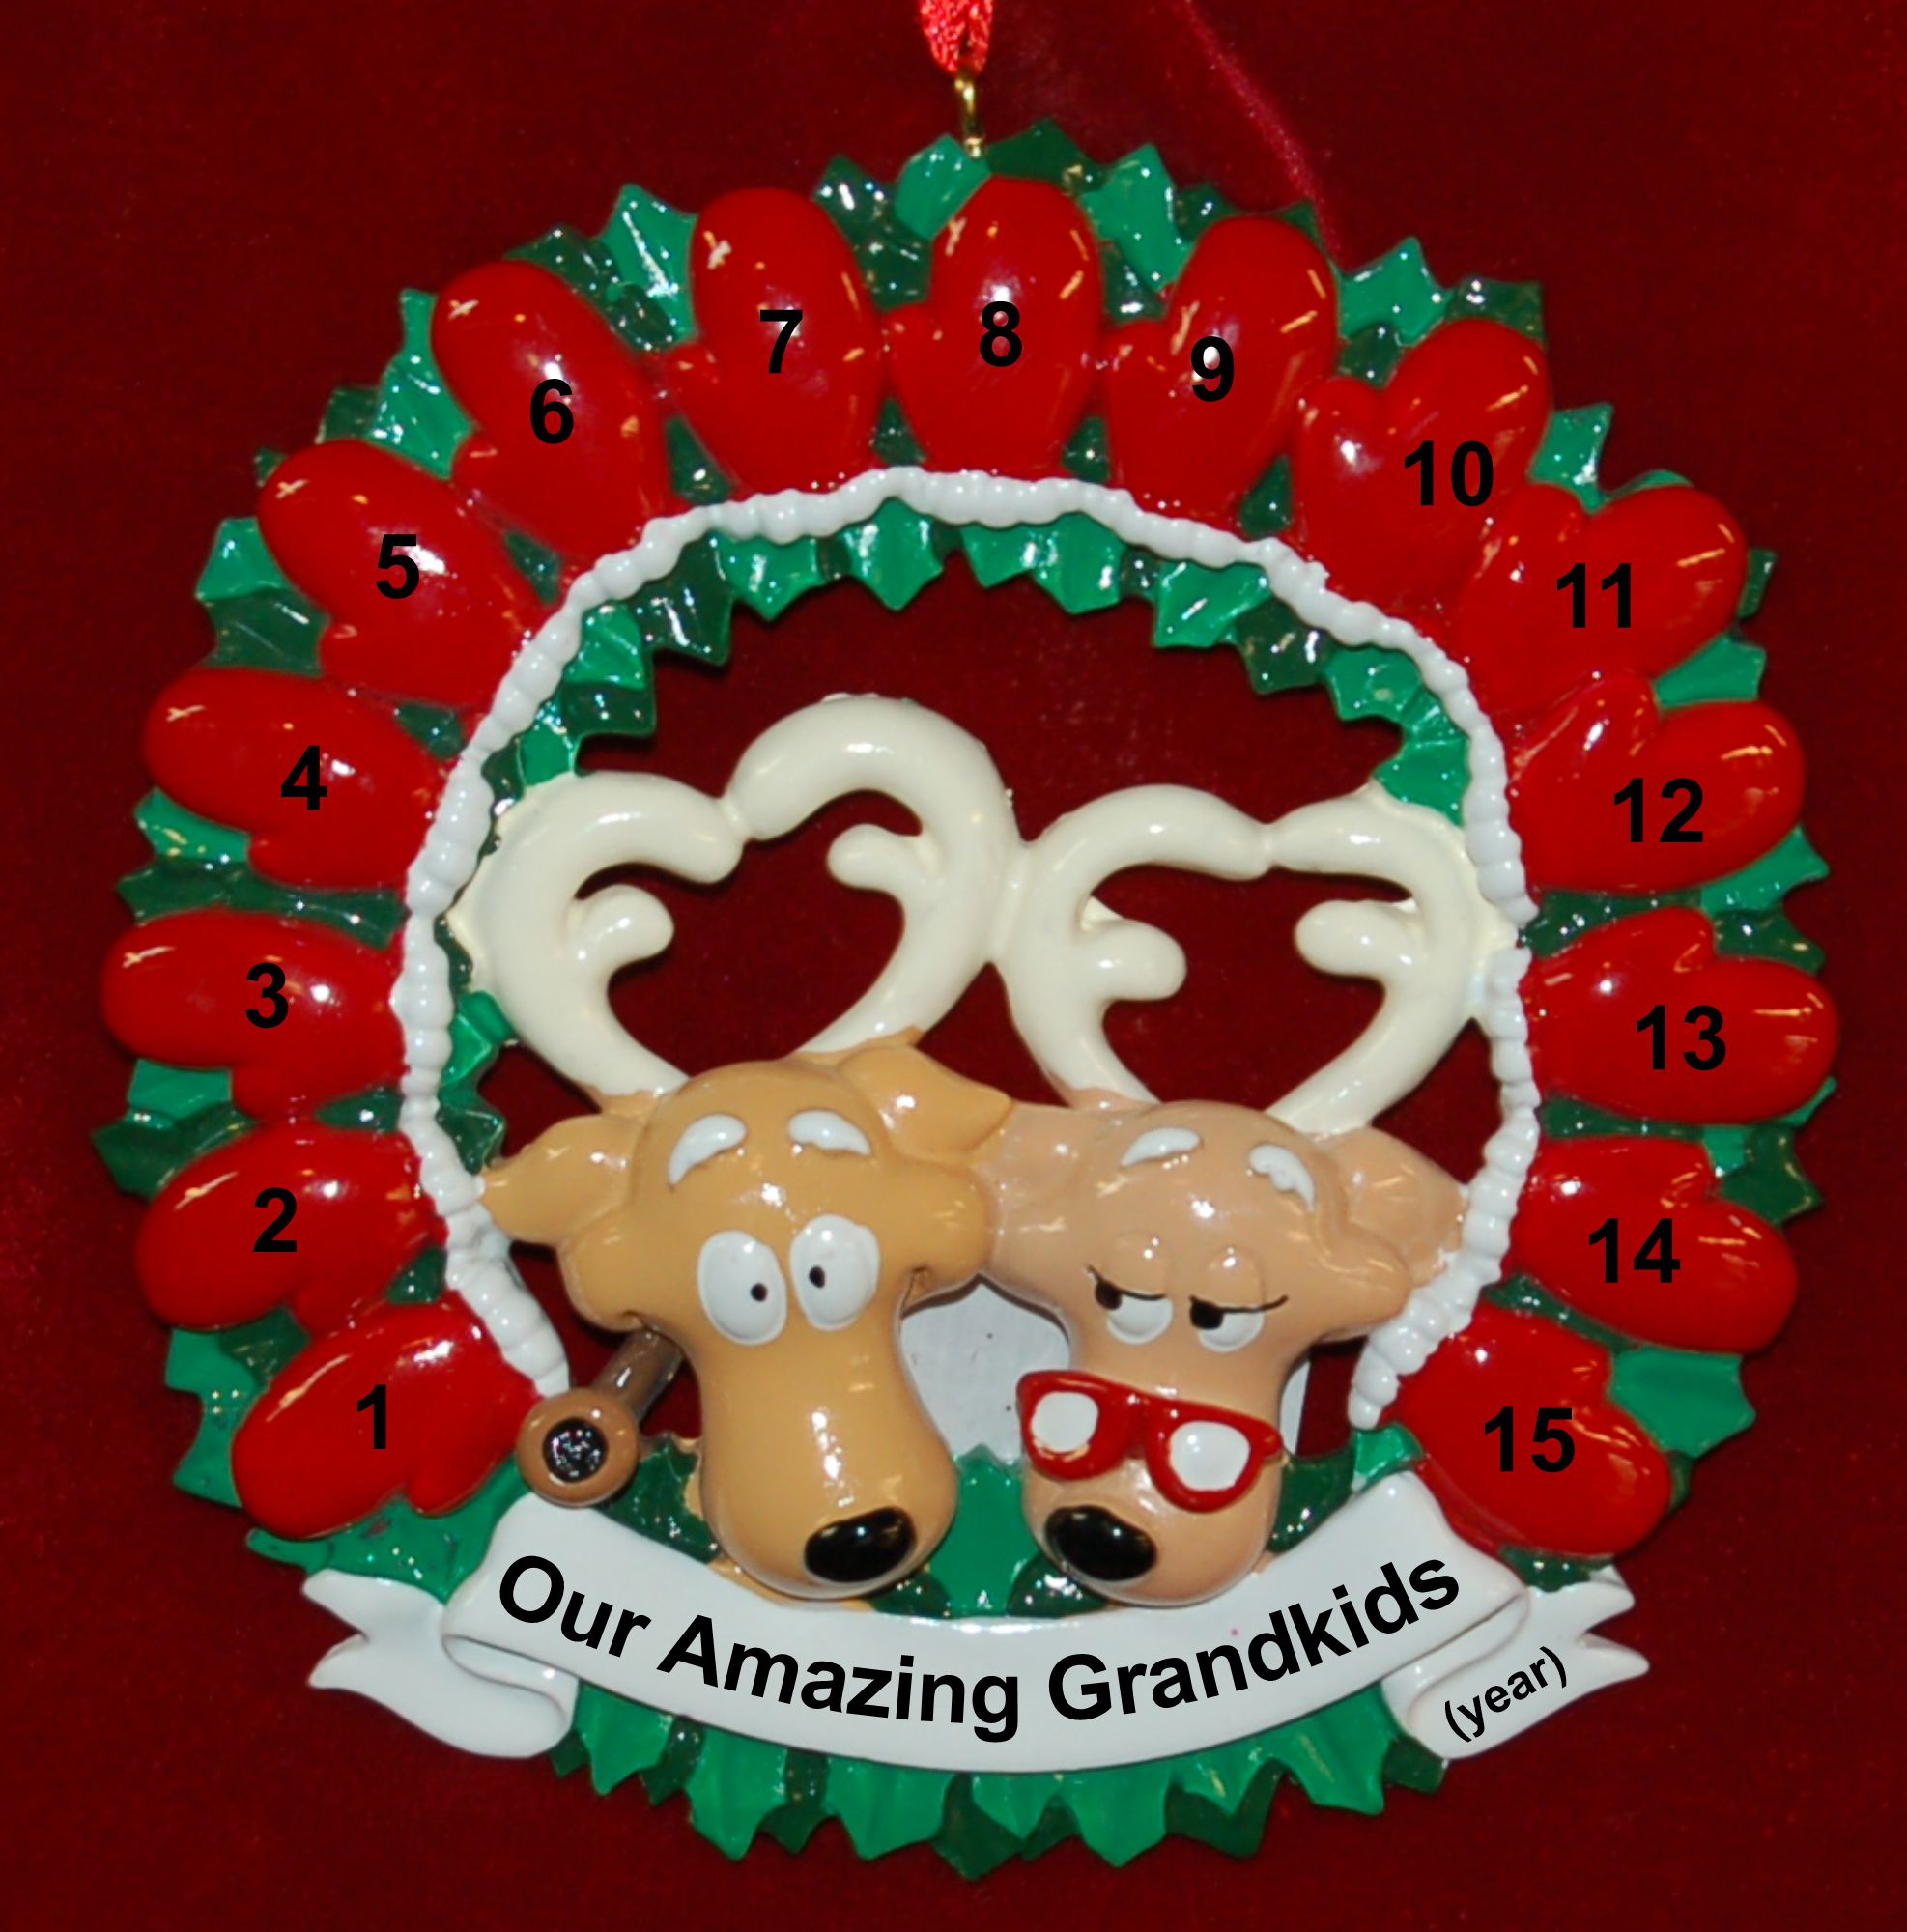 Grandparents Christmas Ornament up to 15 Grandkids Personalized by RussellRhodes.com